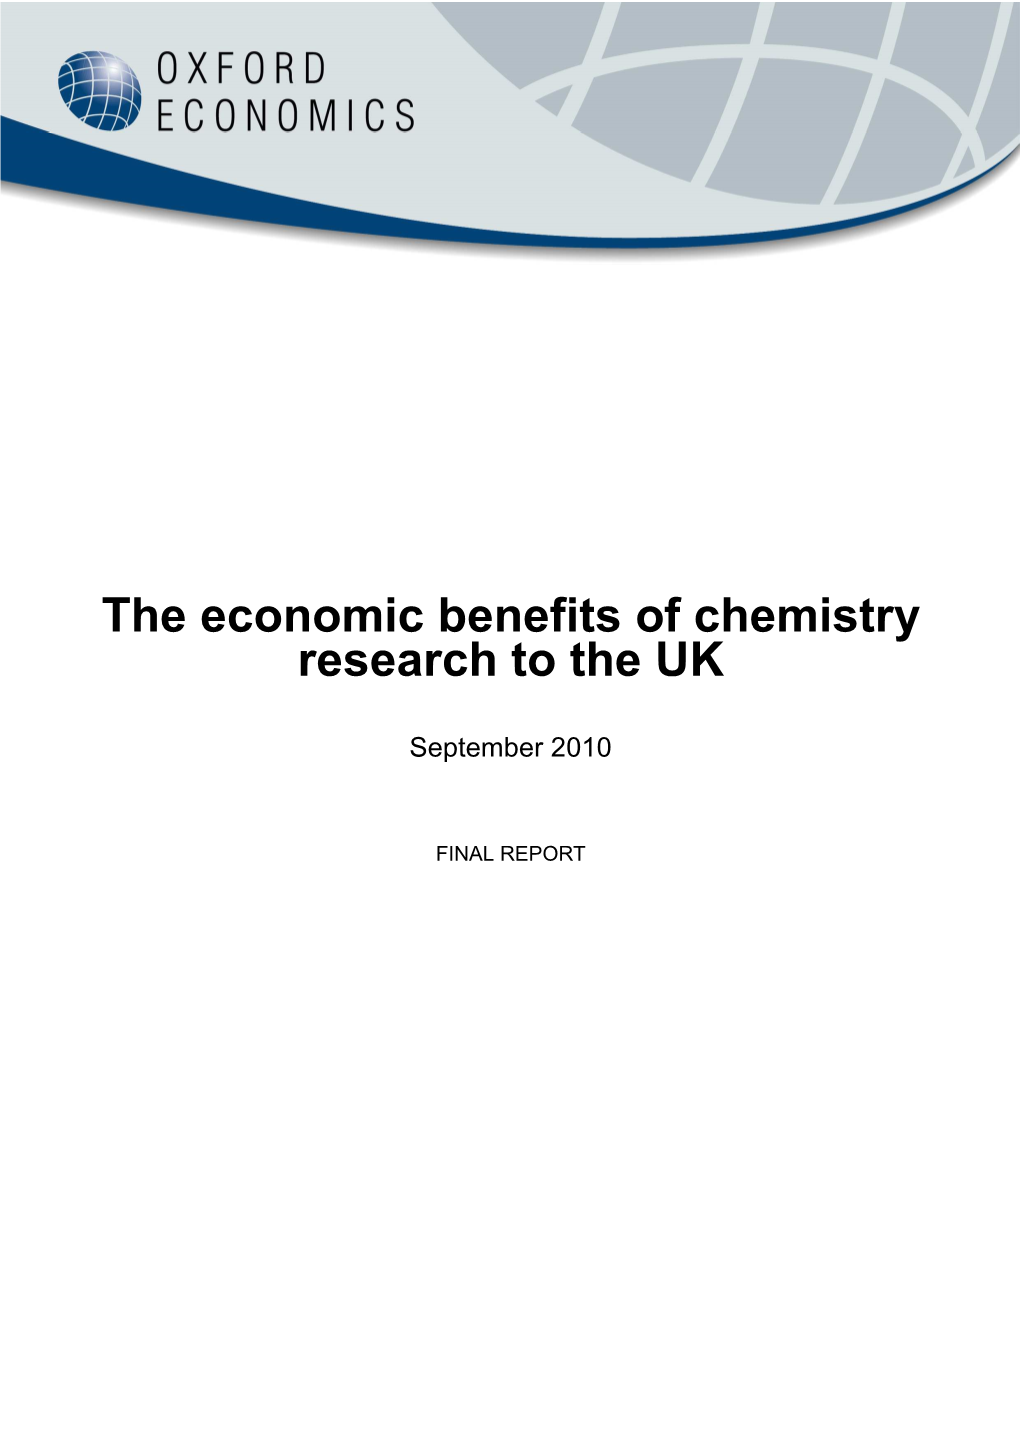 The Economic Benefits of Chemistry Research to the UK